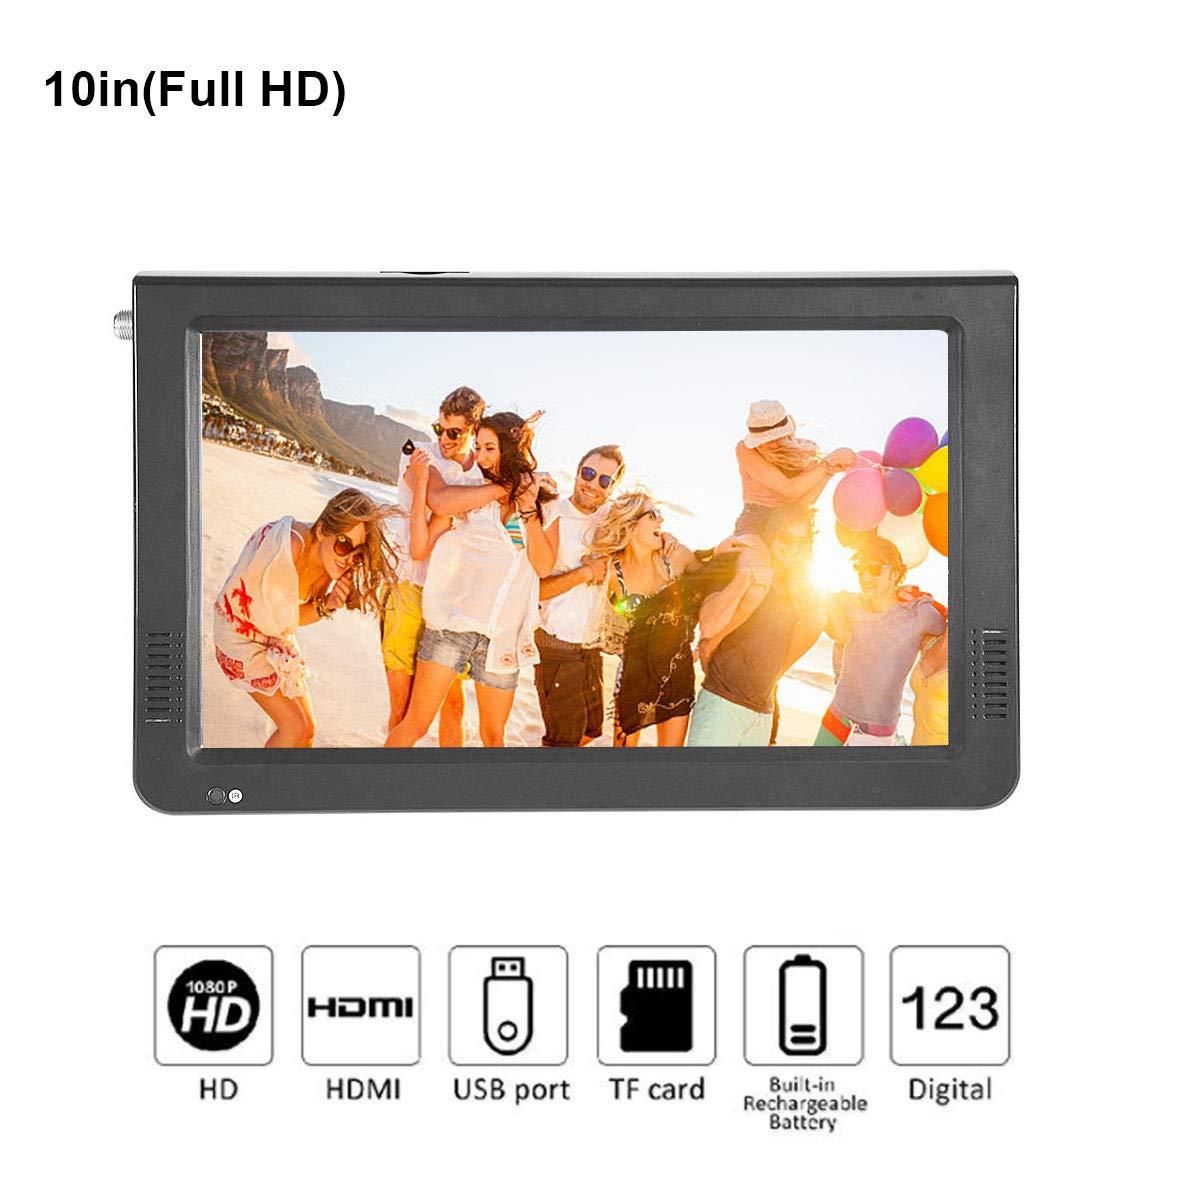 10 inch Portable Digital Television, Small 16:9 ATSC 1080P HD HDMI Video Player TFT LED TV Built-in Rechargeable Battery Support USB and TF Card for Car, Caravan, Camping, Outdoor or Kitchen